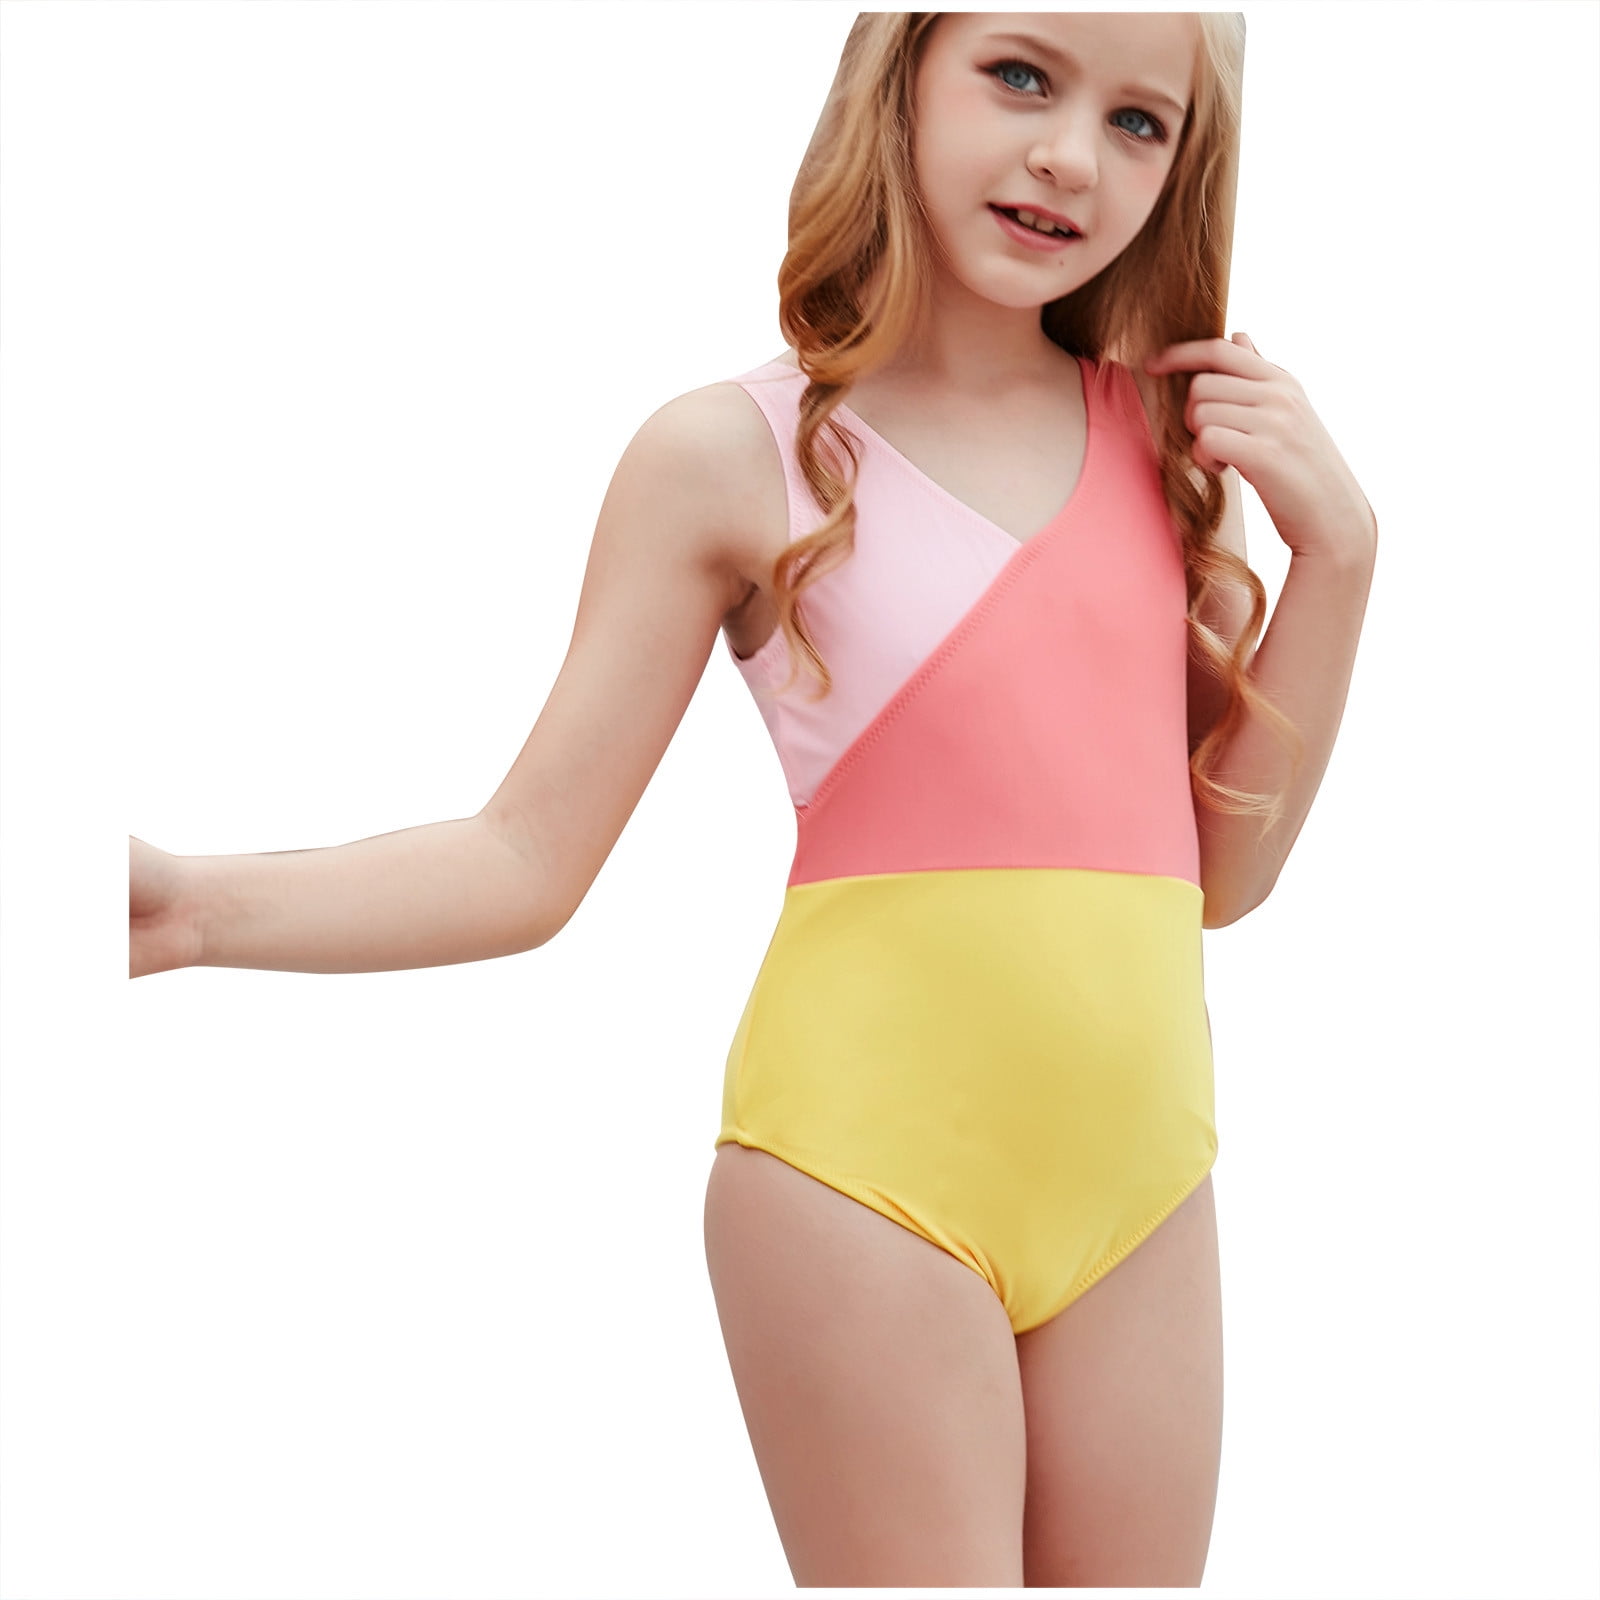 Girls Swimsuit Color Printed Backless Shoulder Swimwear One Piece Swimsuit Sport Set Swimwear for Girls 6-14Years 